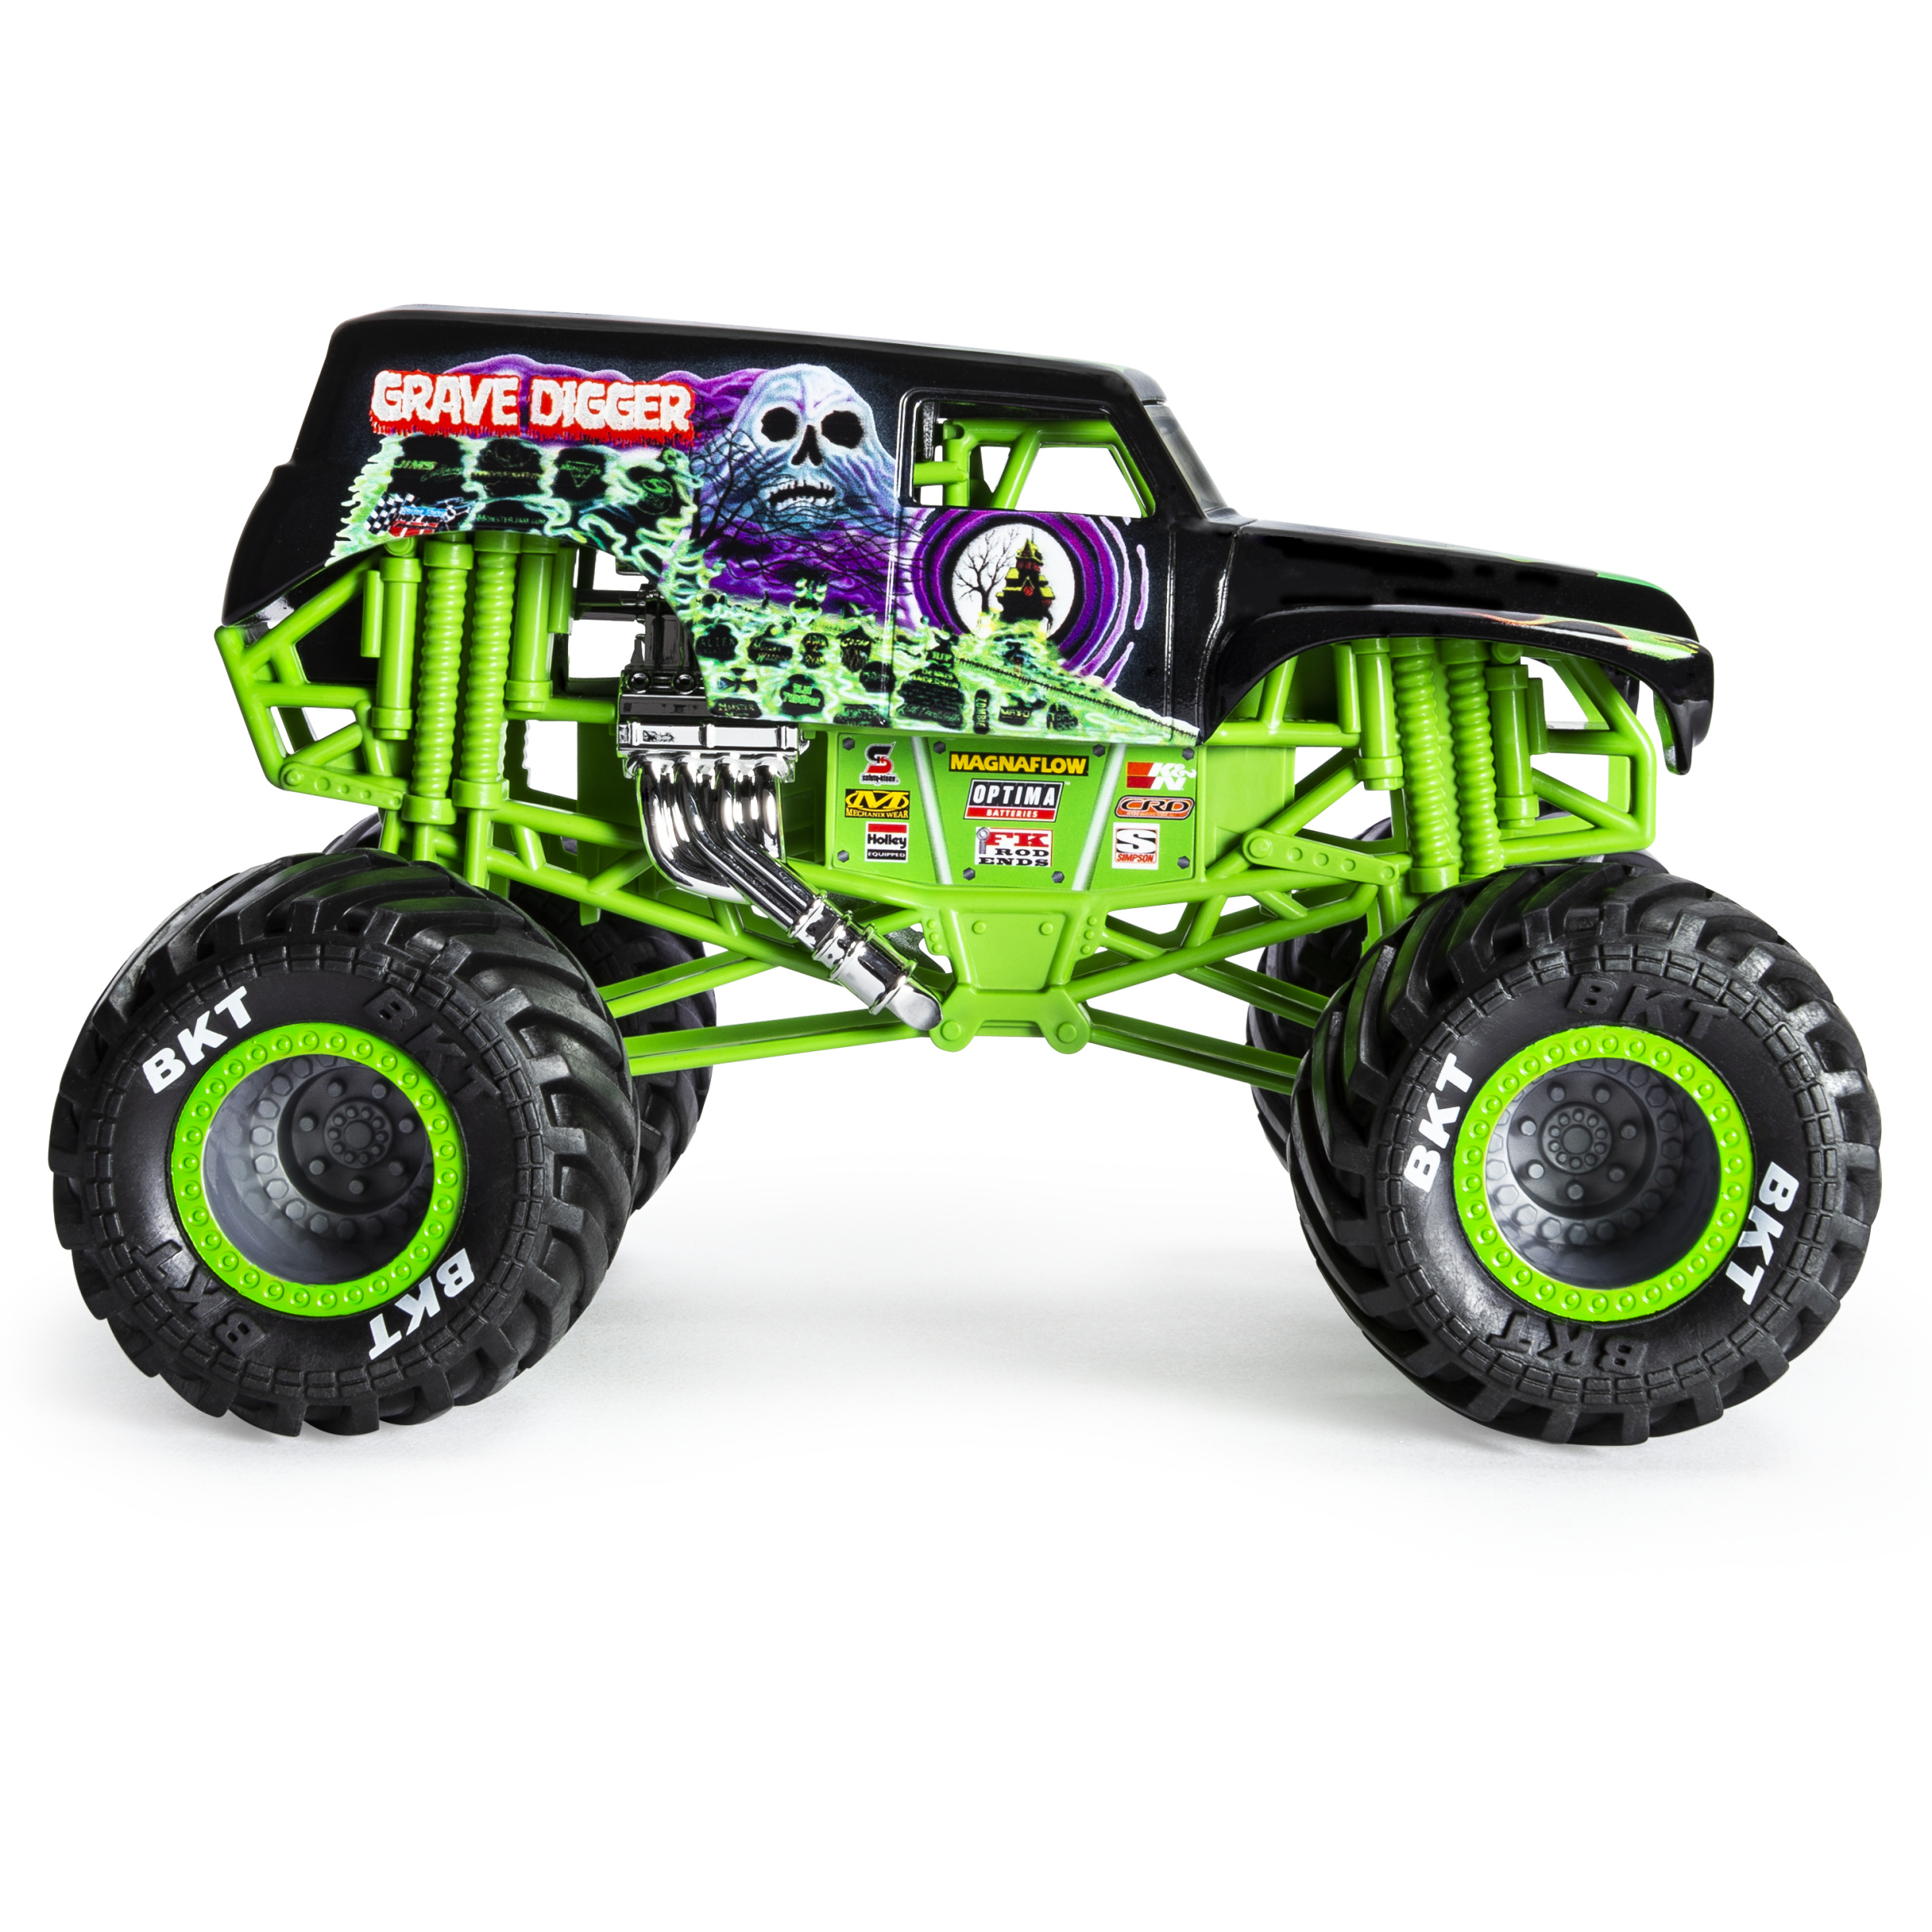 Monster Jam, Official Grave Digger Monster Truck, Die-Cast Vehicle, 1:24 Scale - image 4 of 5